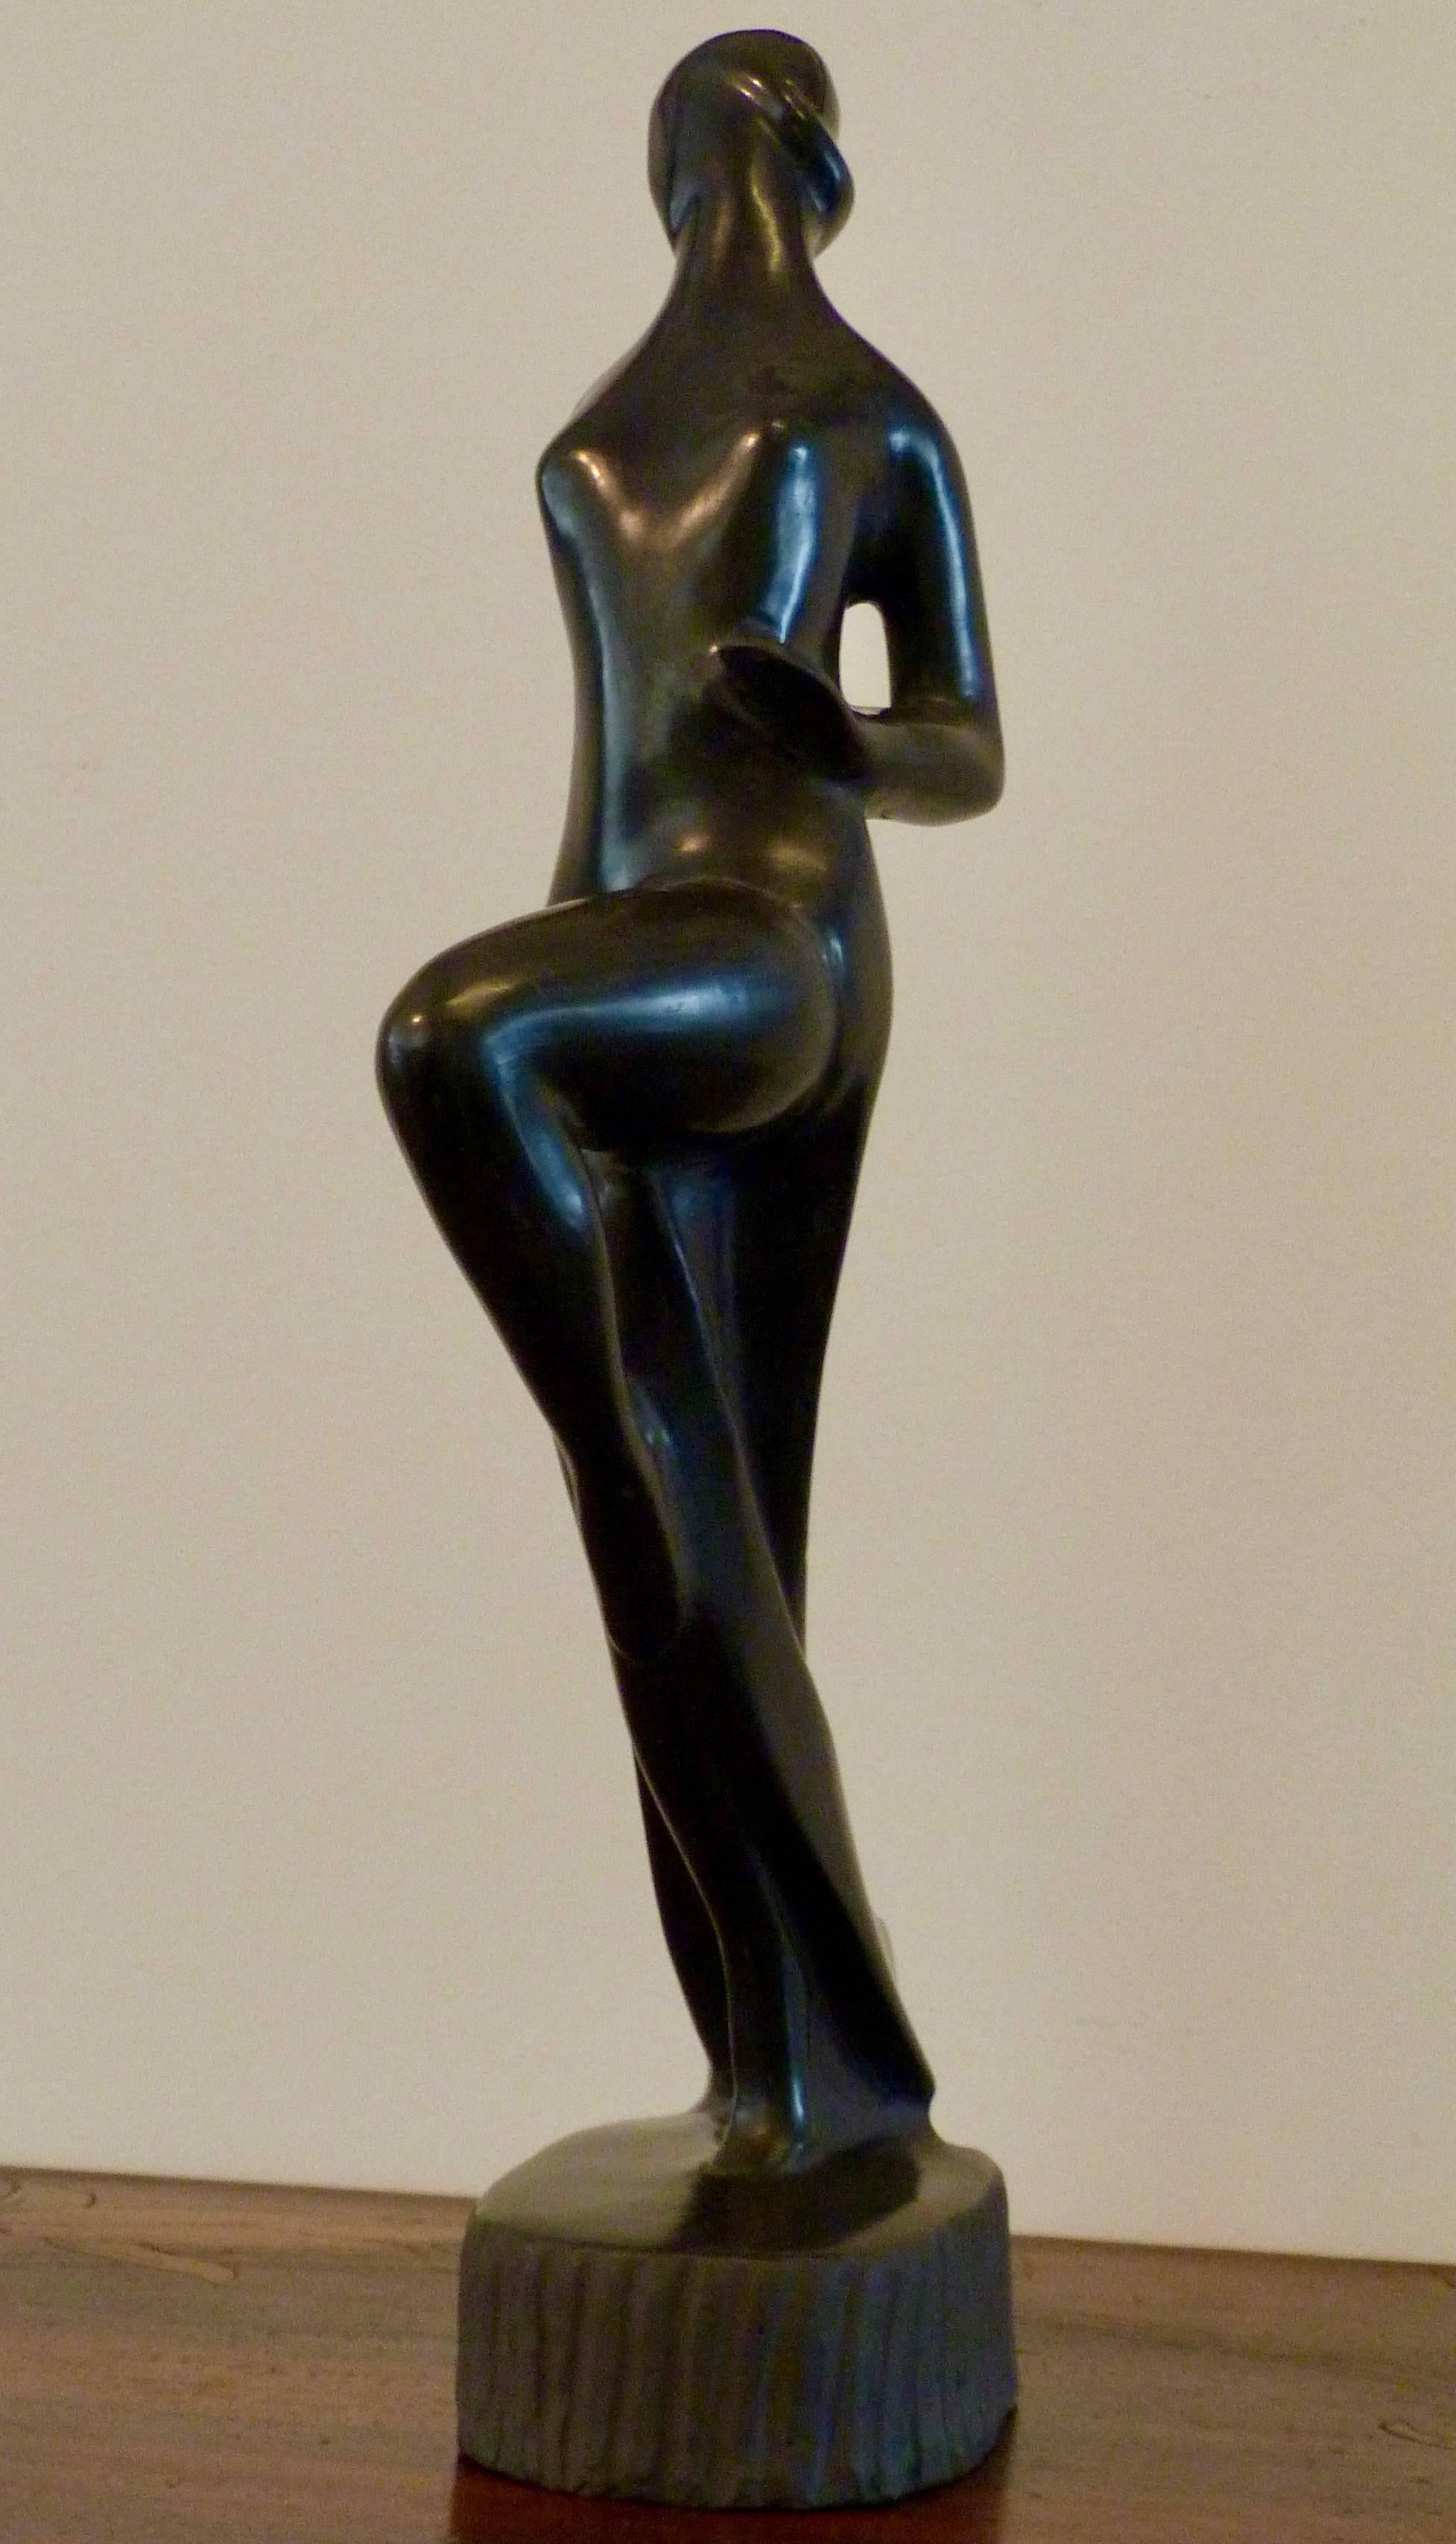 Carlo Alberto Rossi (Gubbio 1903-1970), Manifattura Rossi a Bucchero Female Sculpture after a Gio Ponti drawing, signed C. A. Rossi, circa 1940

Gio Ponti in the 1940s collaborated with famous artist and artisans and Carlo Alberto Rossi of